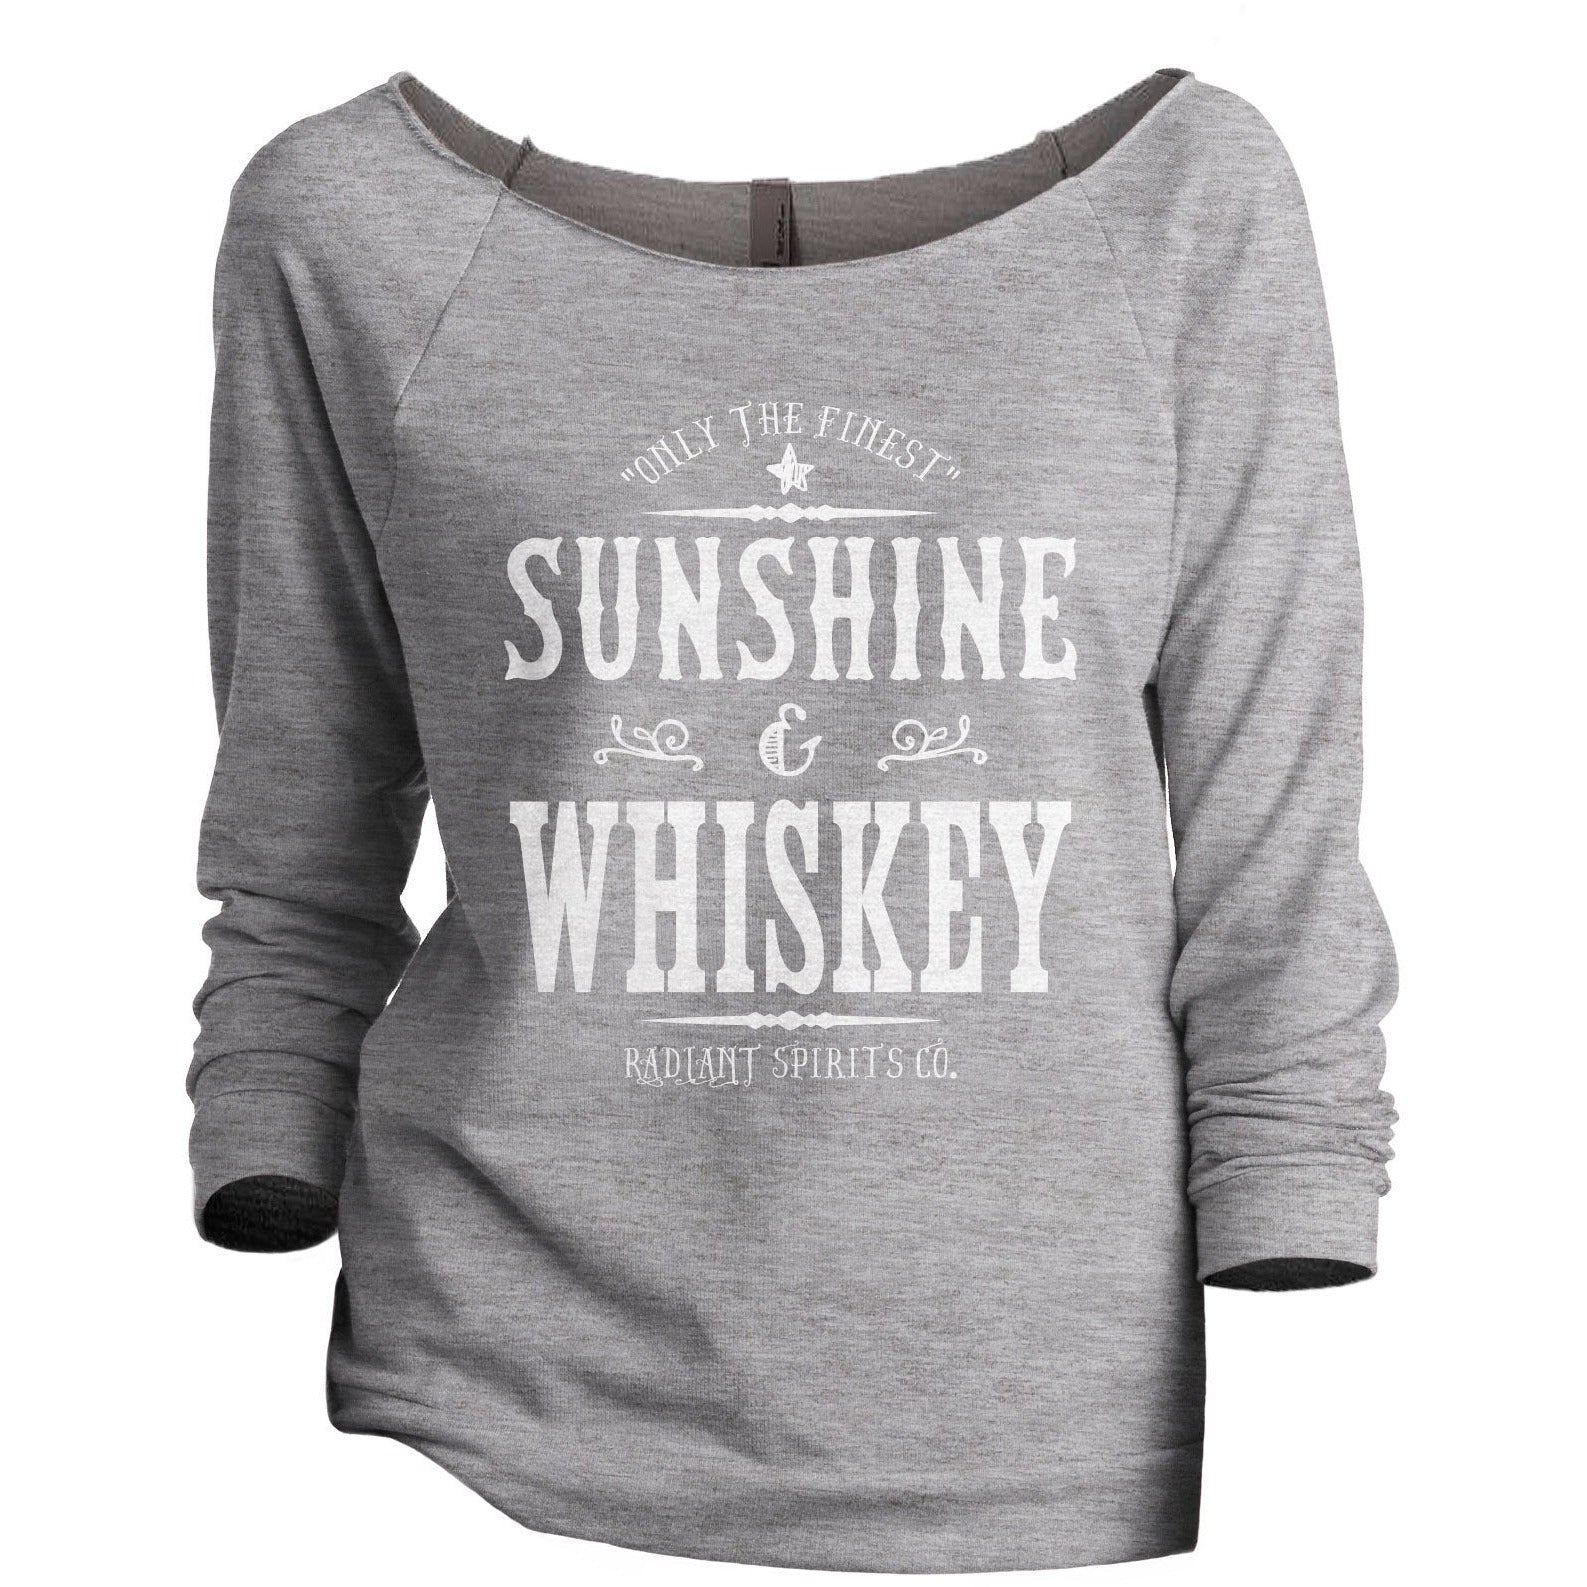 Only The Finest Sunshine & Whiskey Radiant Spirits Co - thread tank | Stories you can wear.